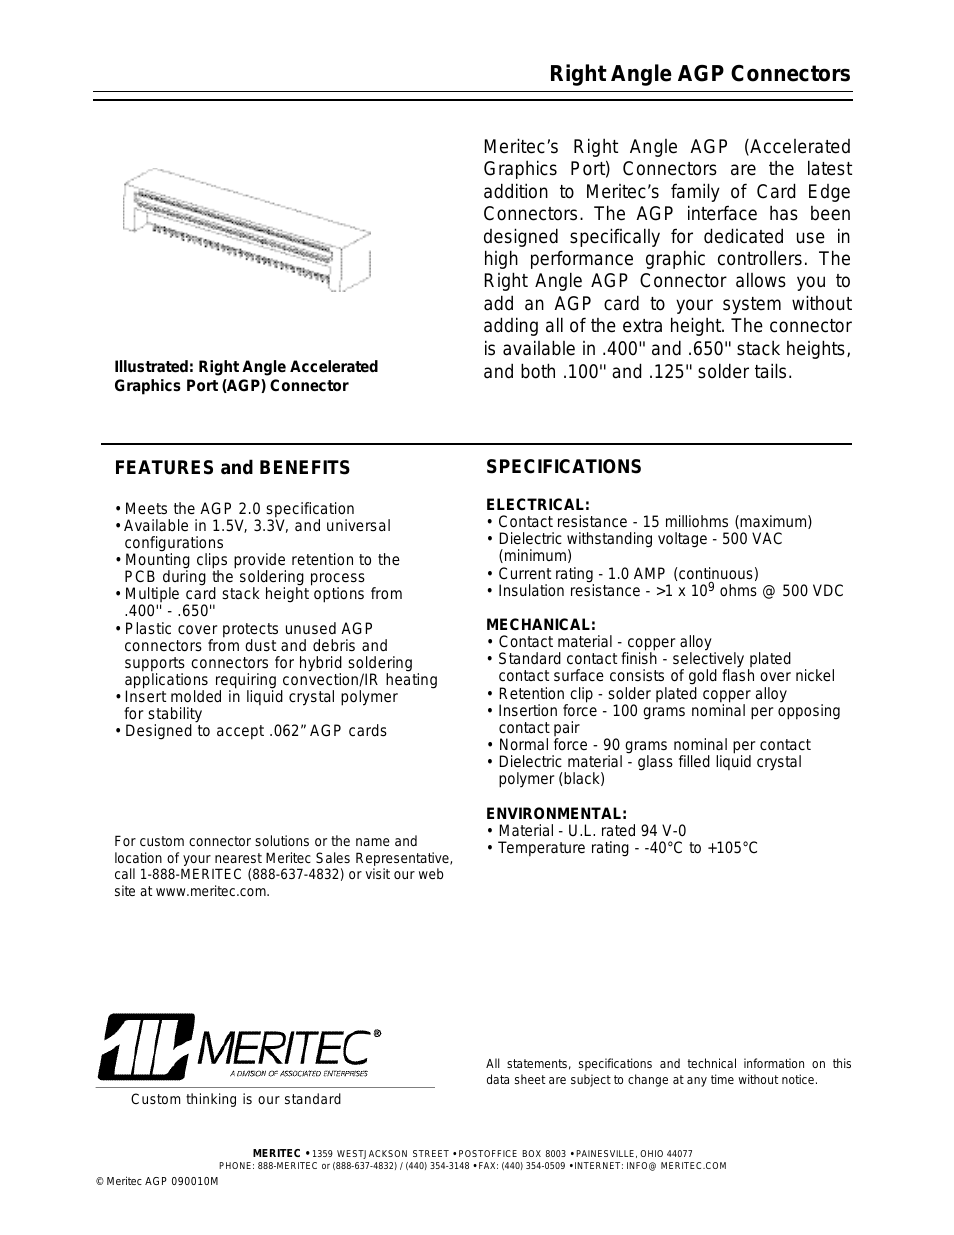 Right Angle AGP Connectors (Page 1)